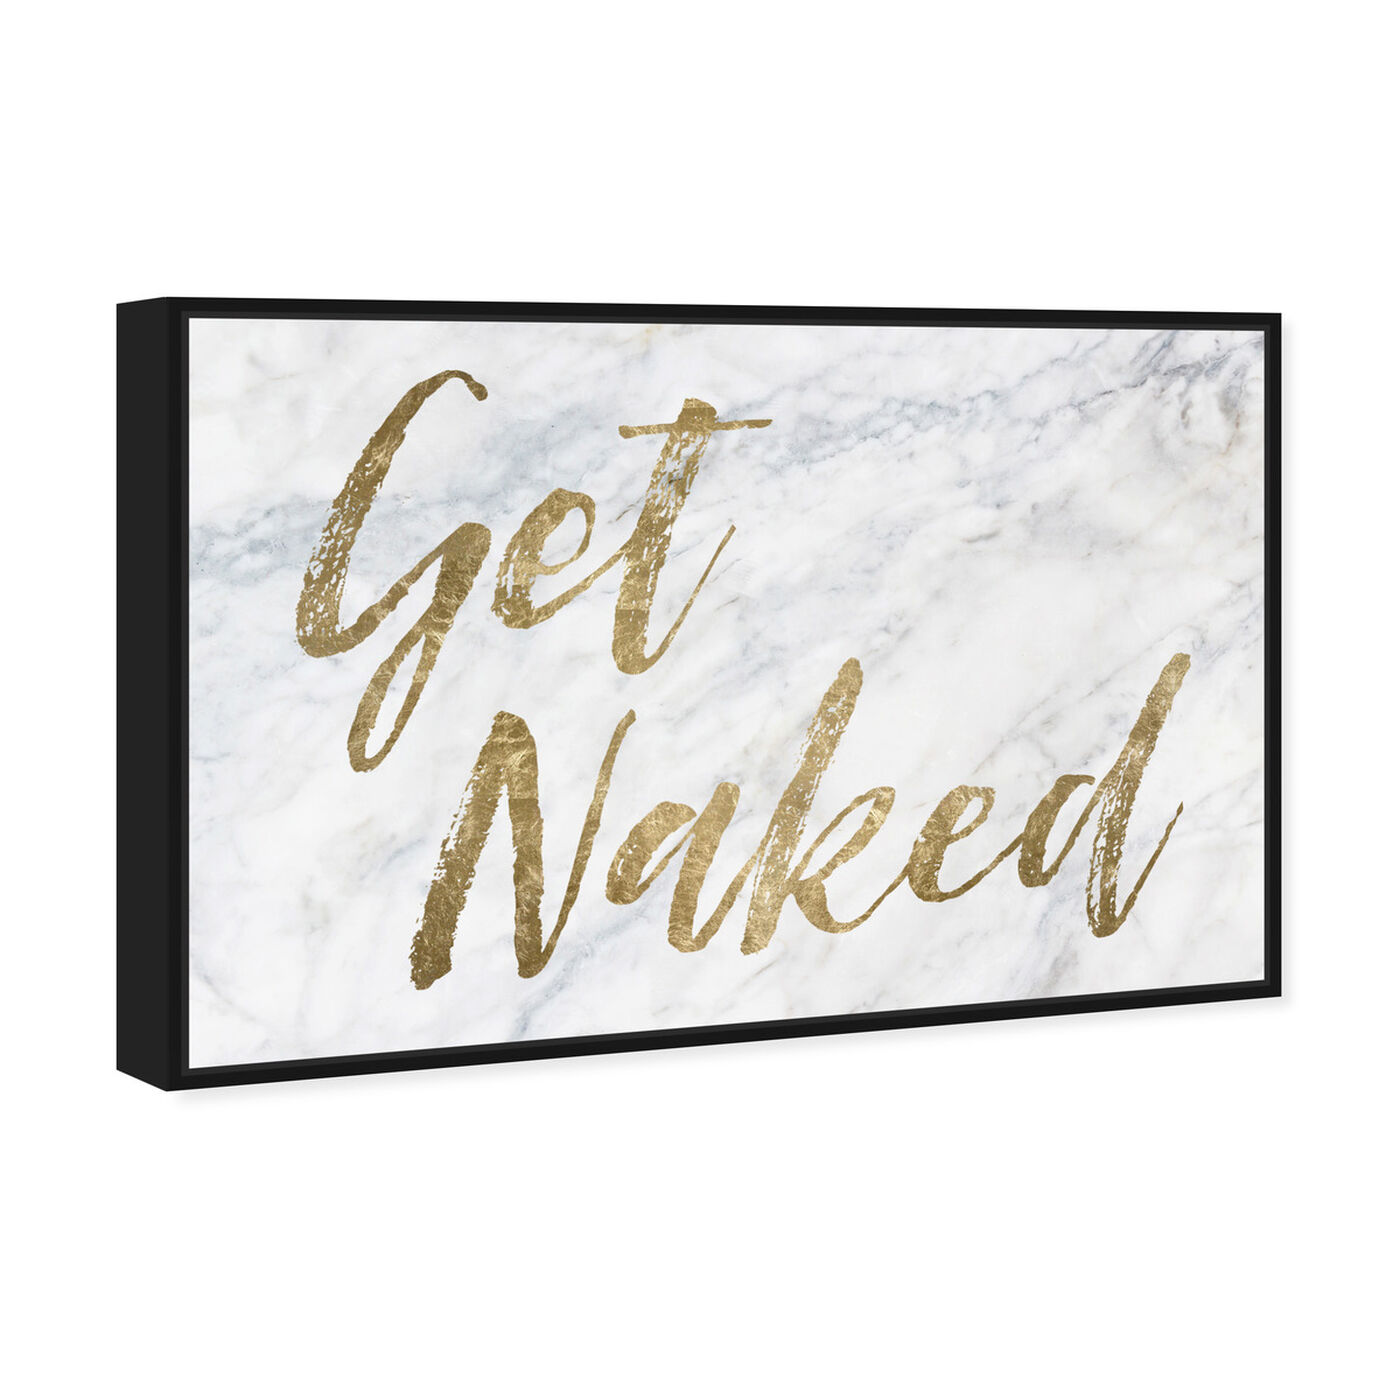 Angled view of Get Naked - Bathroom featuring typography and quotes and funny quotes and sayings art.